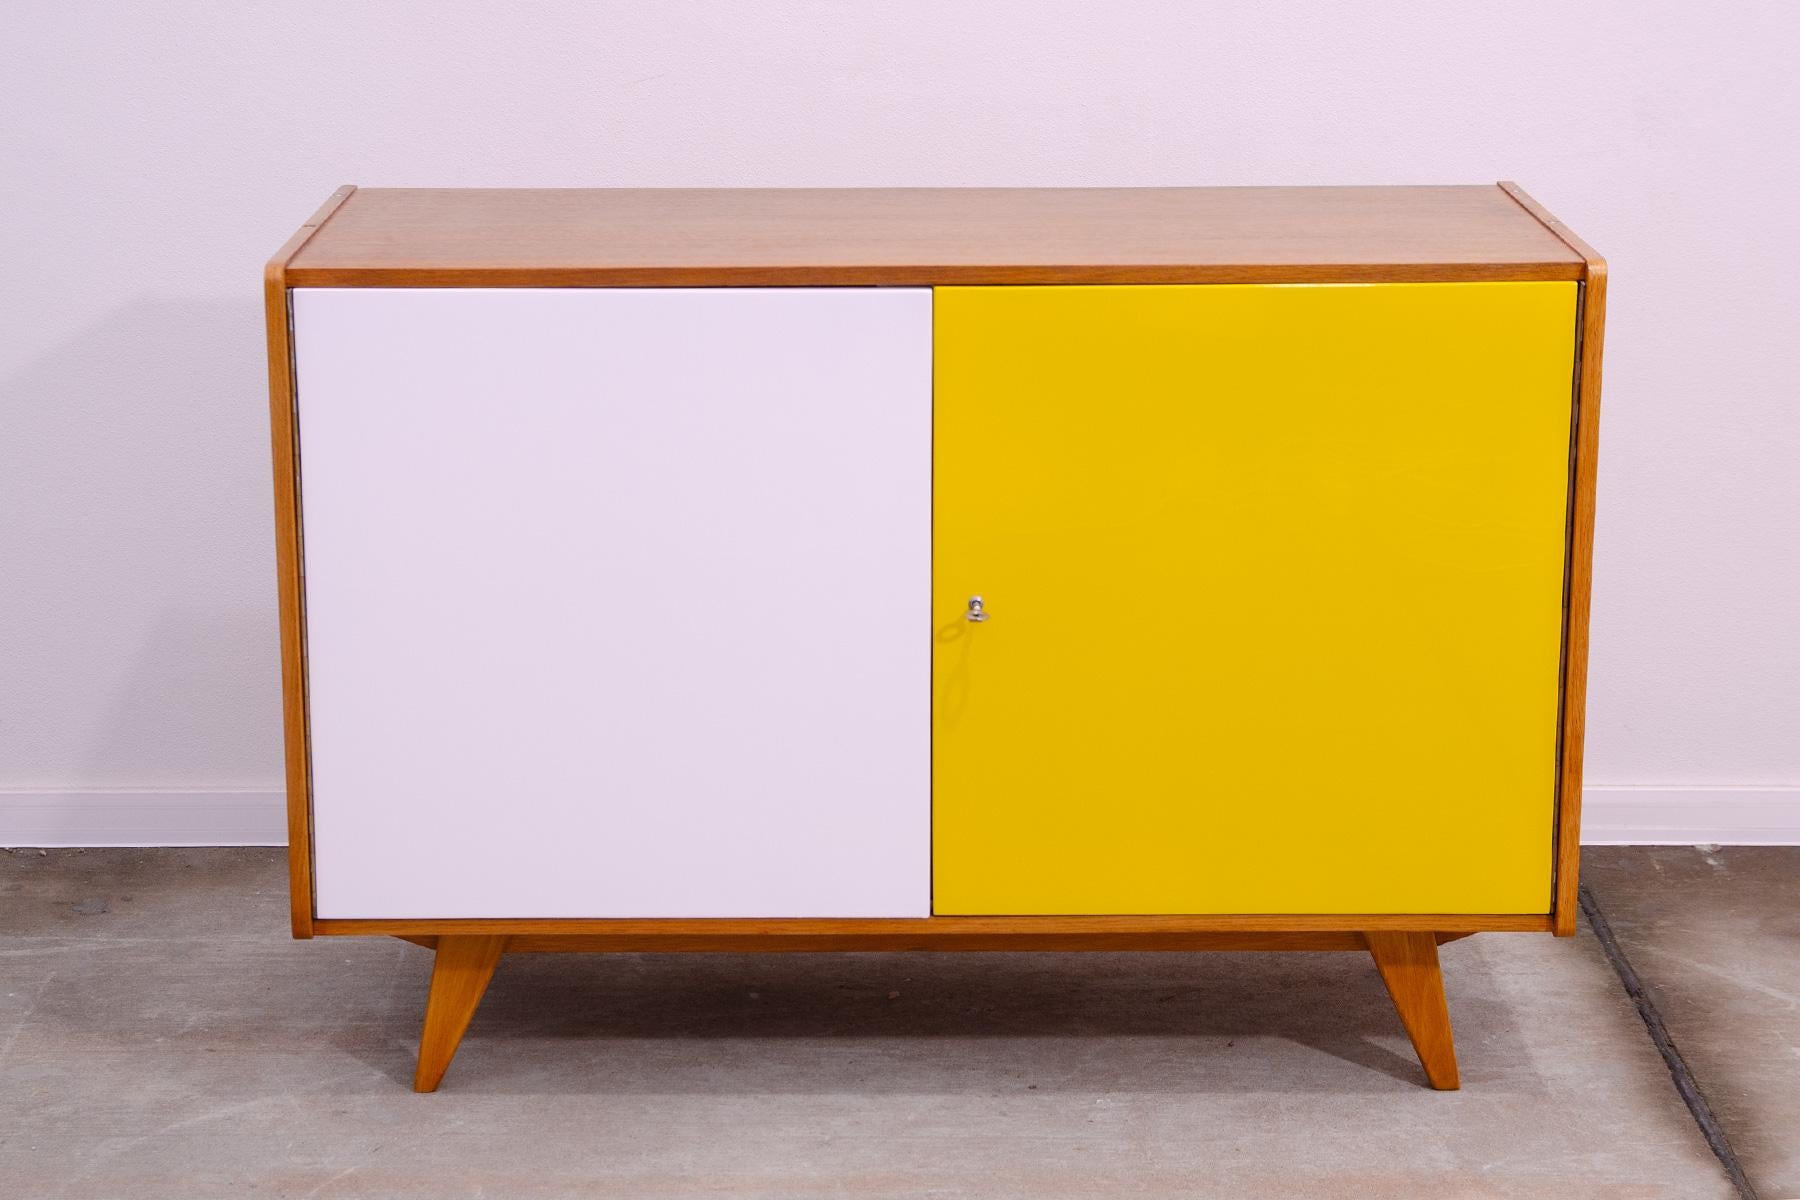 Mid century sideboard-cabinet, catalogue No. U-450, designed by Jiri Jiroutek. It´s made of beechwood, veneer, plywood and laminate. In very good condition.

The cabinet comes from the famous Universal series (U-450), which was designed in 1958 for